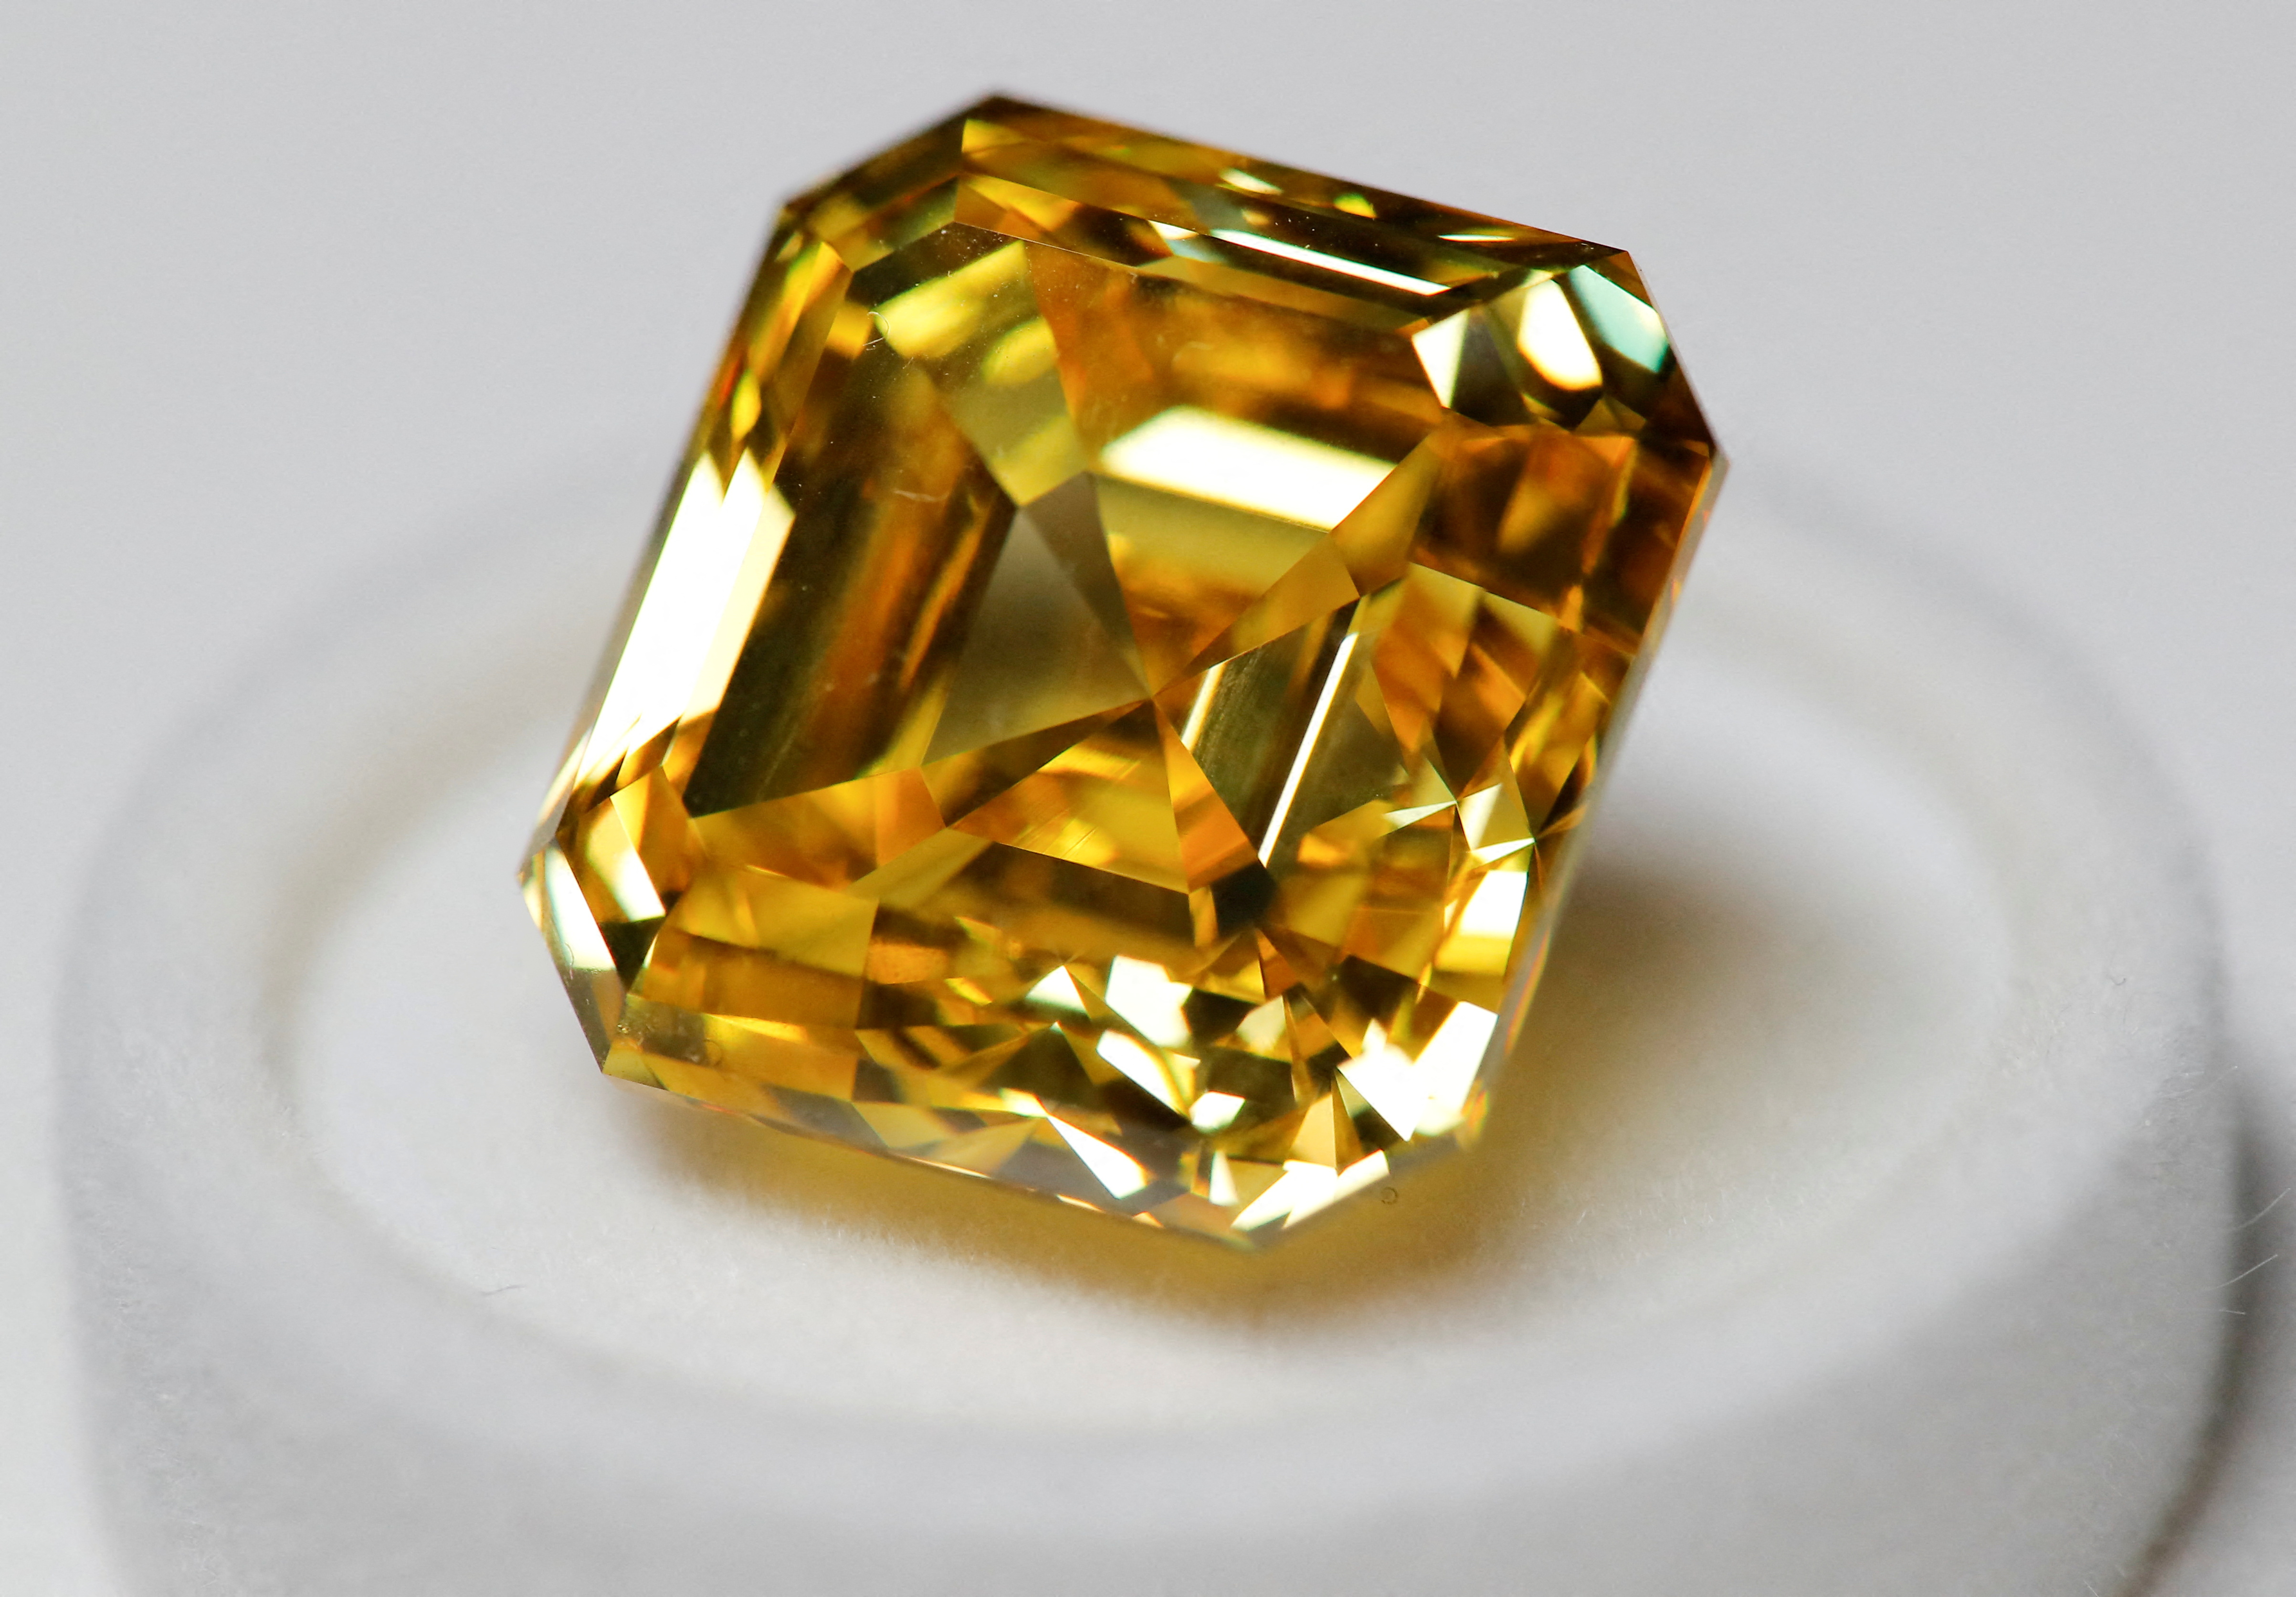 A 20,69-carat yellow diamond is pictured during an official presentation by diamond producer Alrosa in Moscow